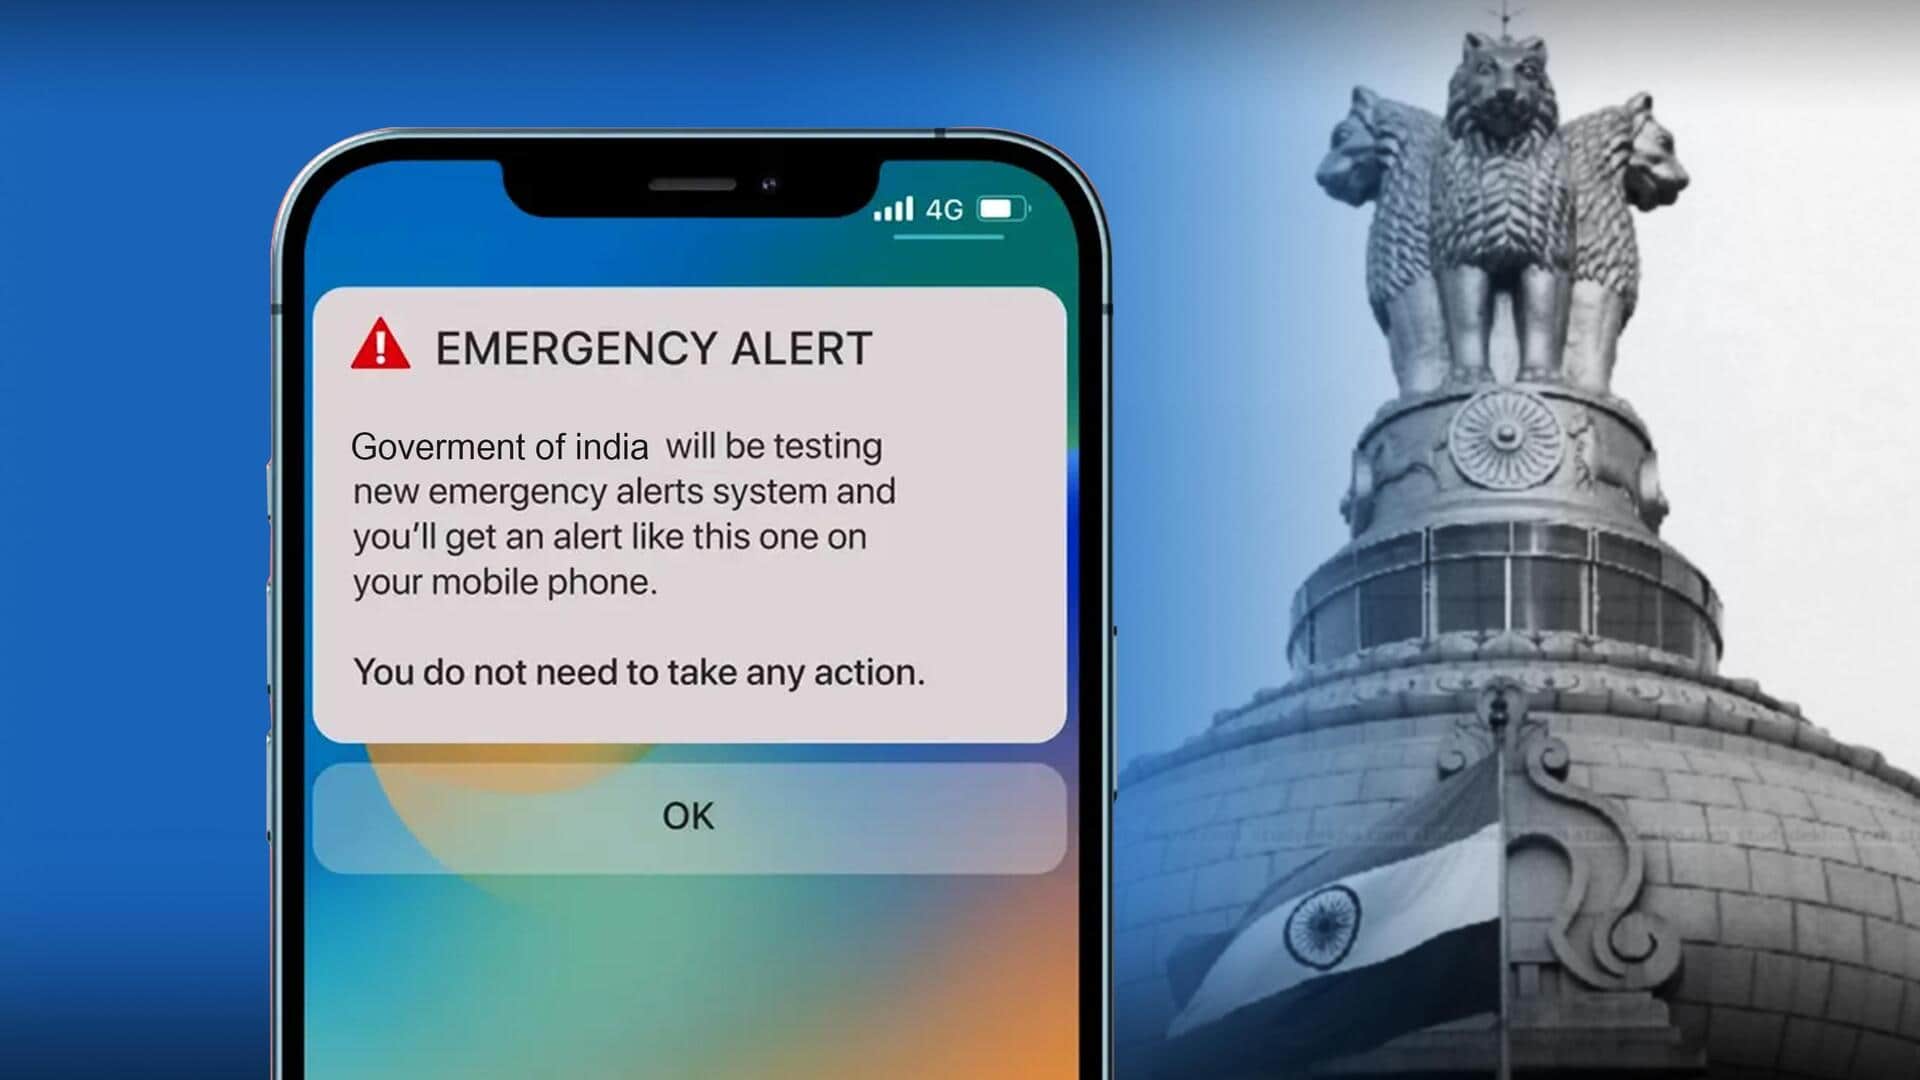 Received emergency notification? Don't panic, government is testing alert system